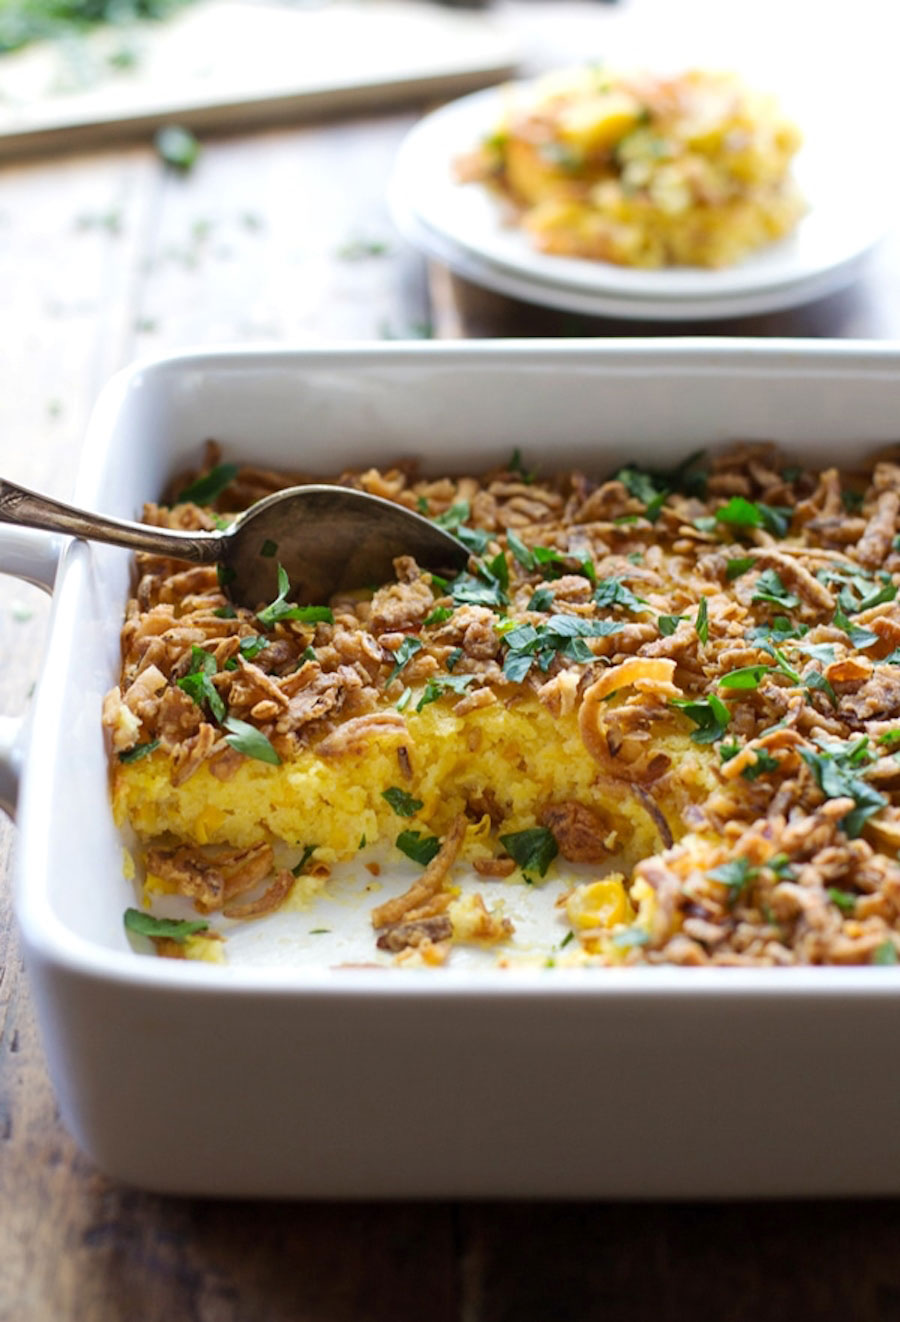 Creamy Corn Pudding with Crispy Onions and Herbs